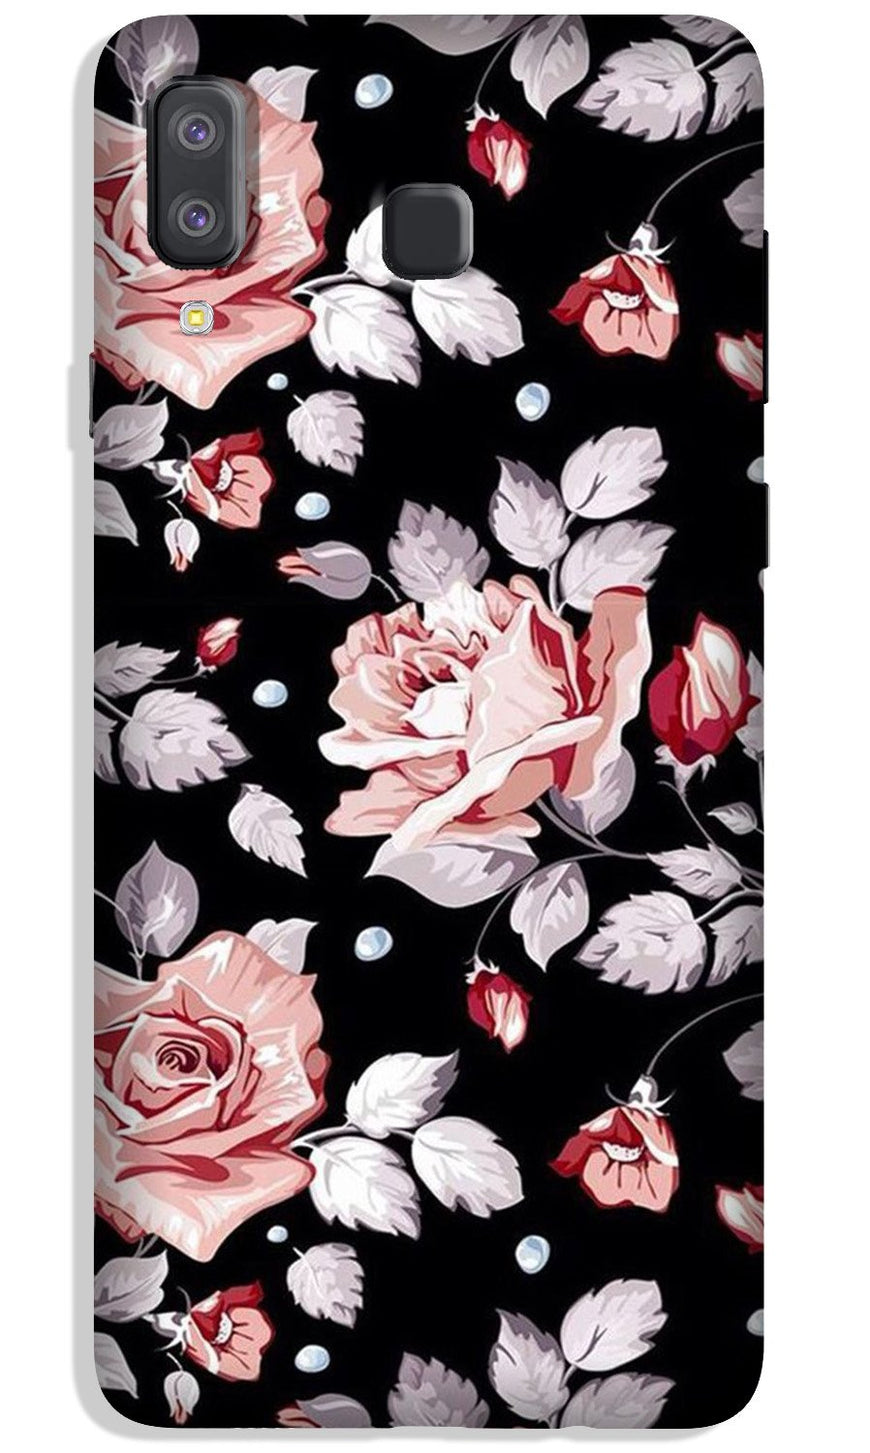 Pink rose Case for Galaxy A8 Star